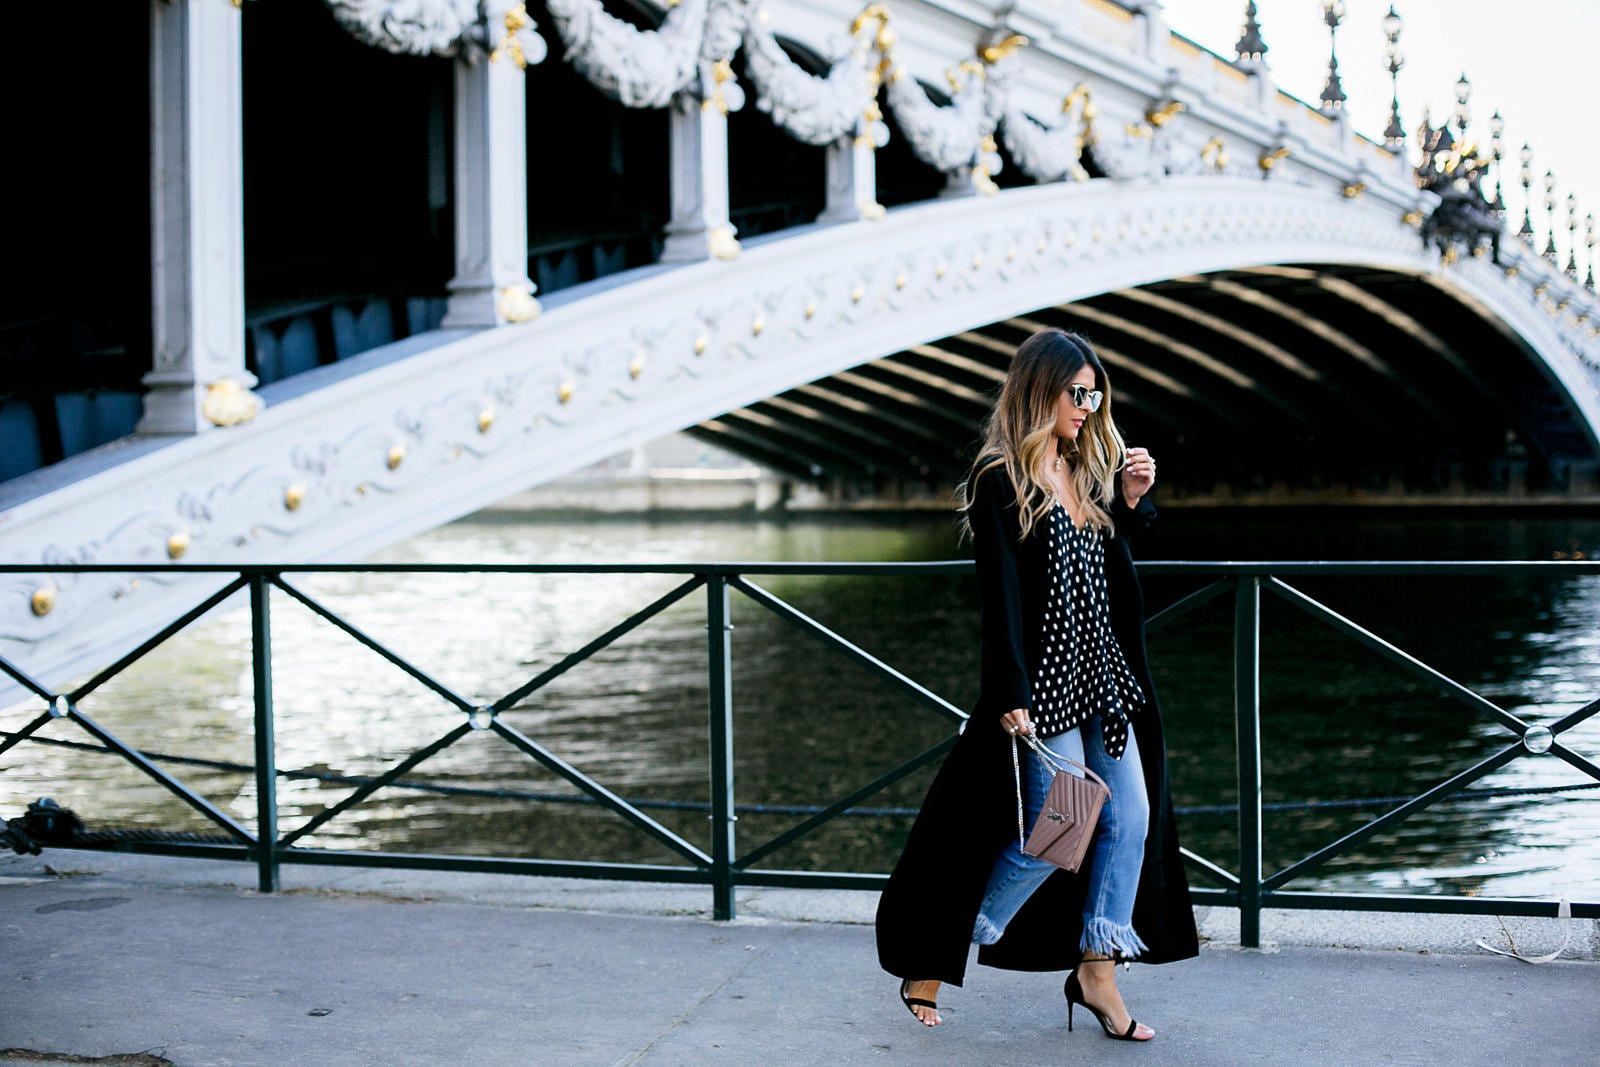 Frayed Hem Jeans, Polka Dots Tops, Raye Sandals with Pearl details, Black Coat, YSL Bag | The Girl From Panama